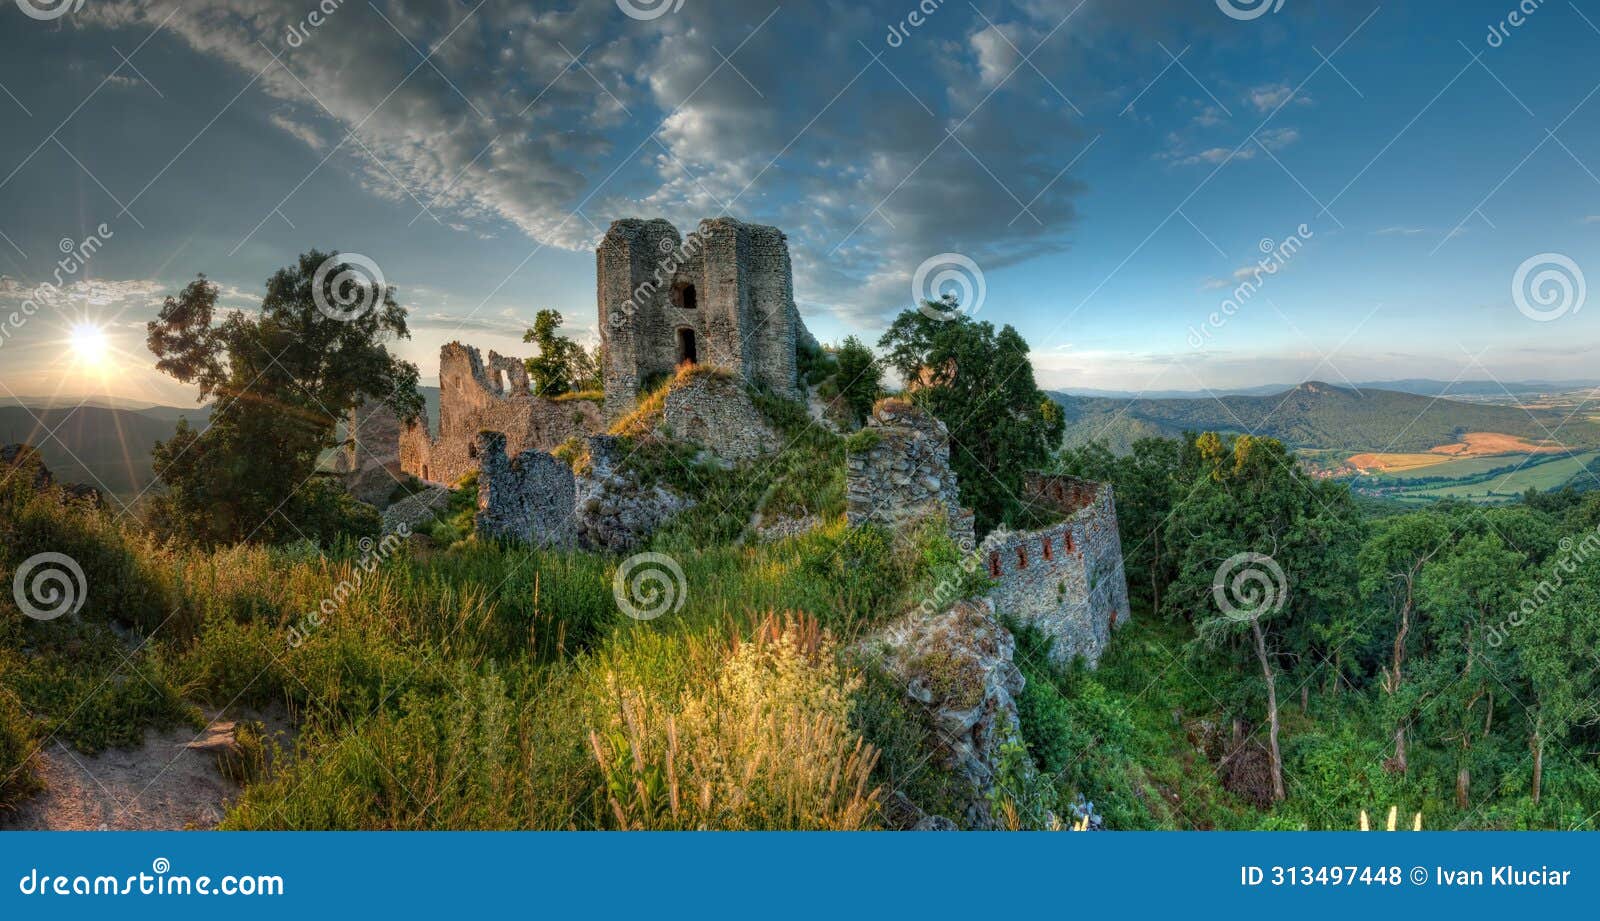 the old fortified castle, a historical ruin of a medieval castle. ruin of castle gymes at sunset